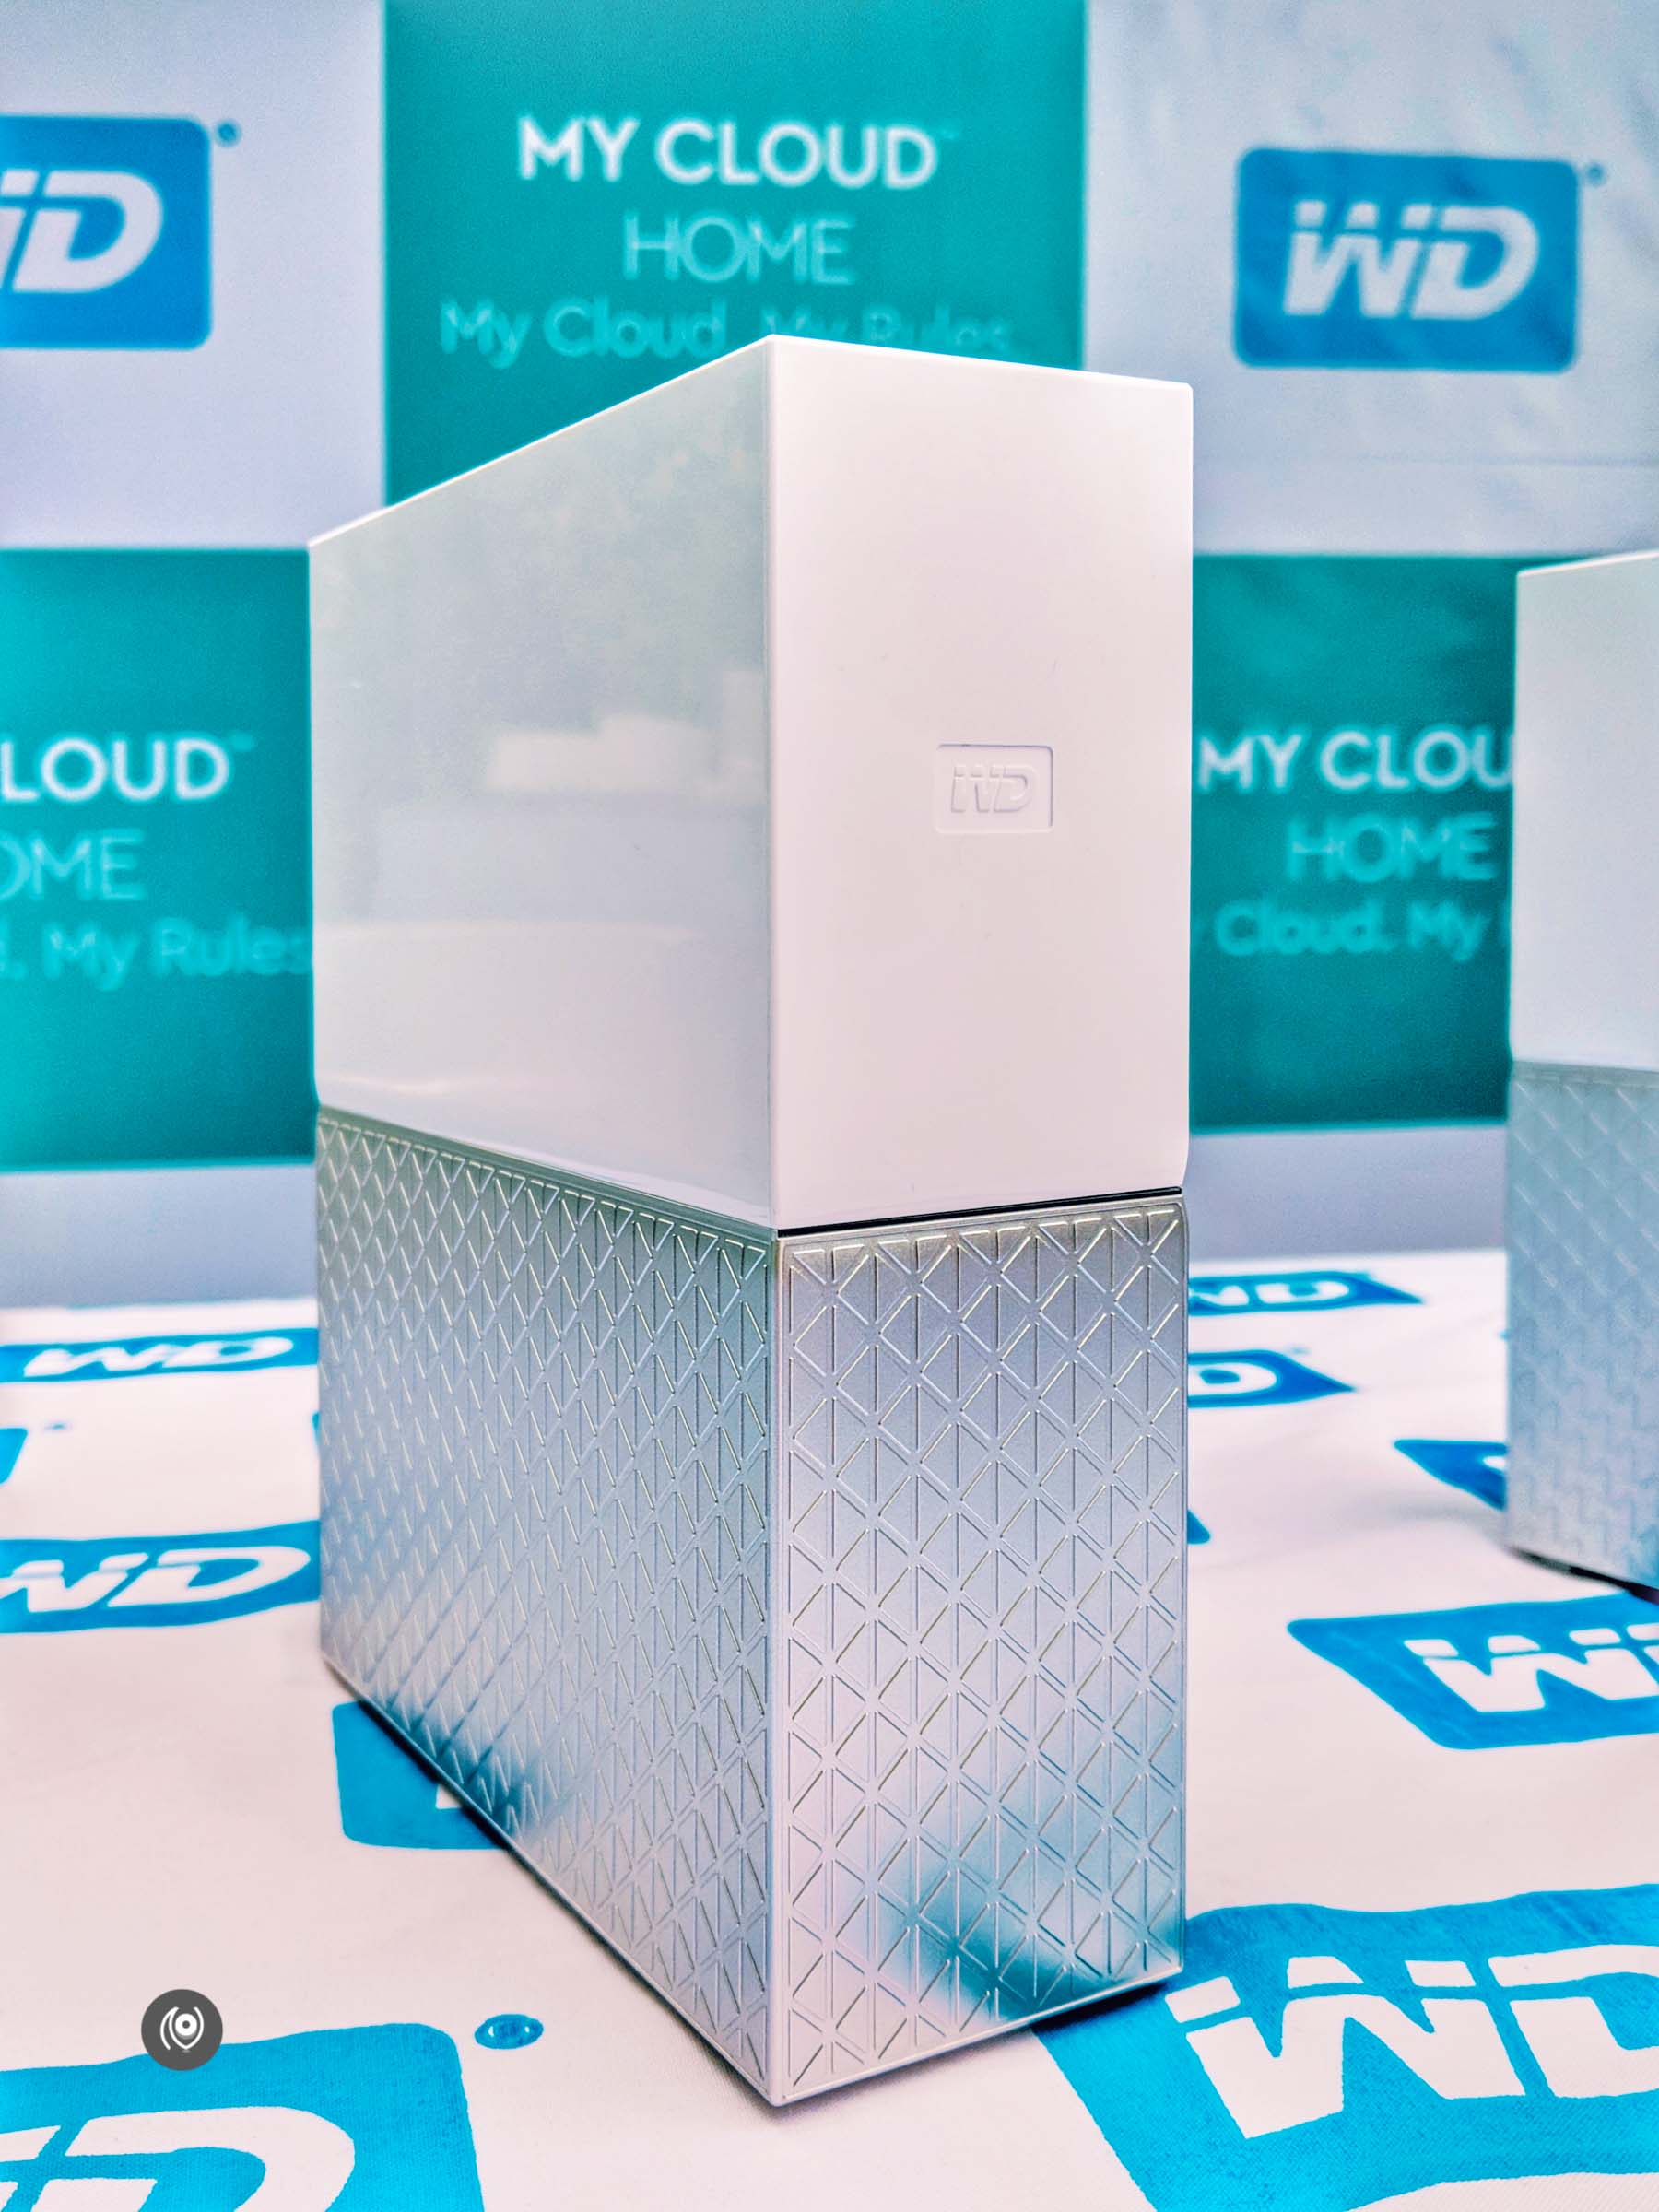 Naina.co, EyesForTechnology, Western Digital, WDCreators, MyCloudMyRules, Hard Disk Drive, Hard Drive, My Cloud Home, My Cloud Home Duo, Qutub, Olive, Launch Event, Client, New Delhi